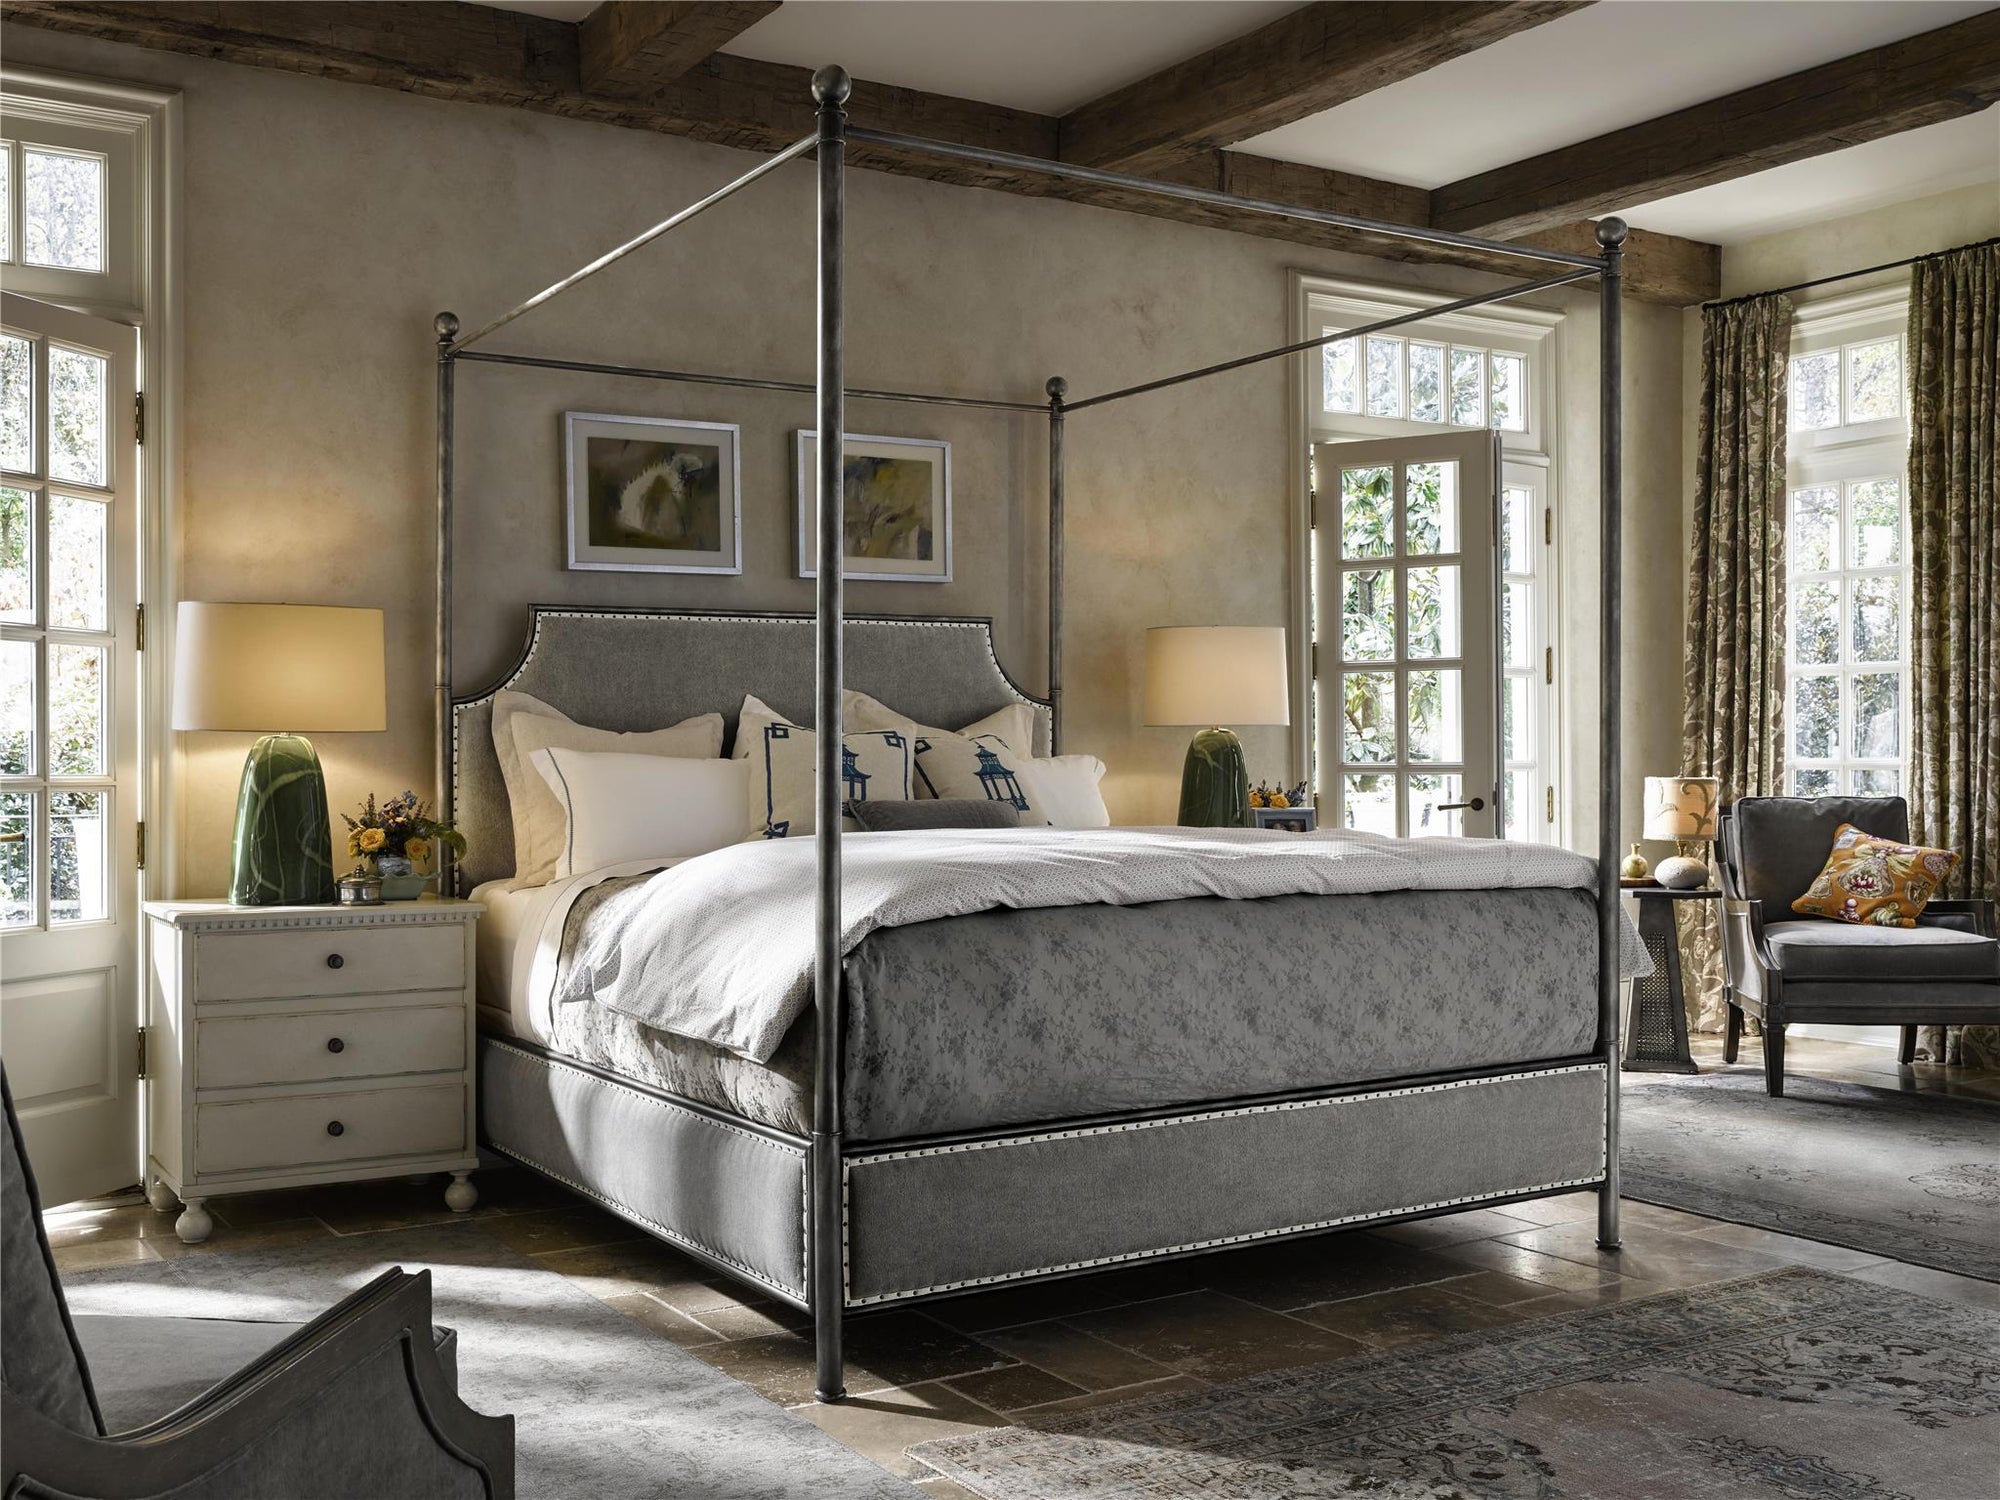 Sojourn Respite Queen Bed Frame